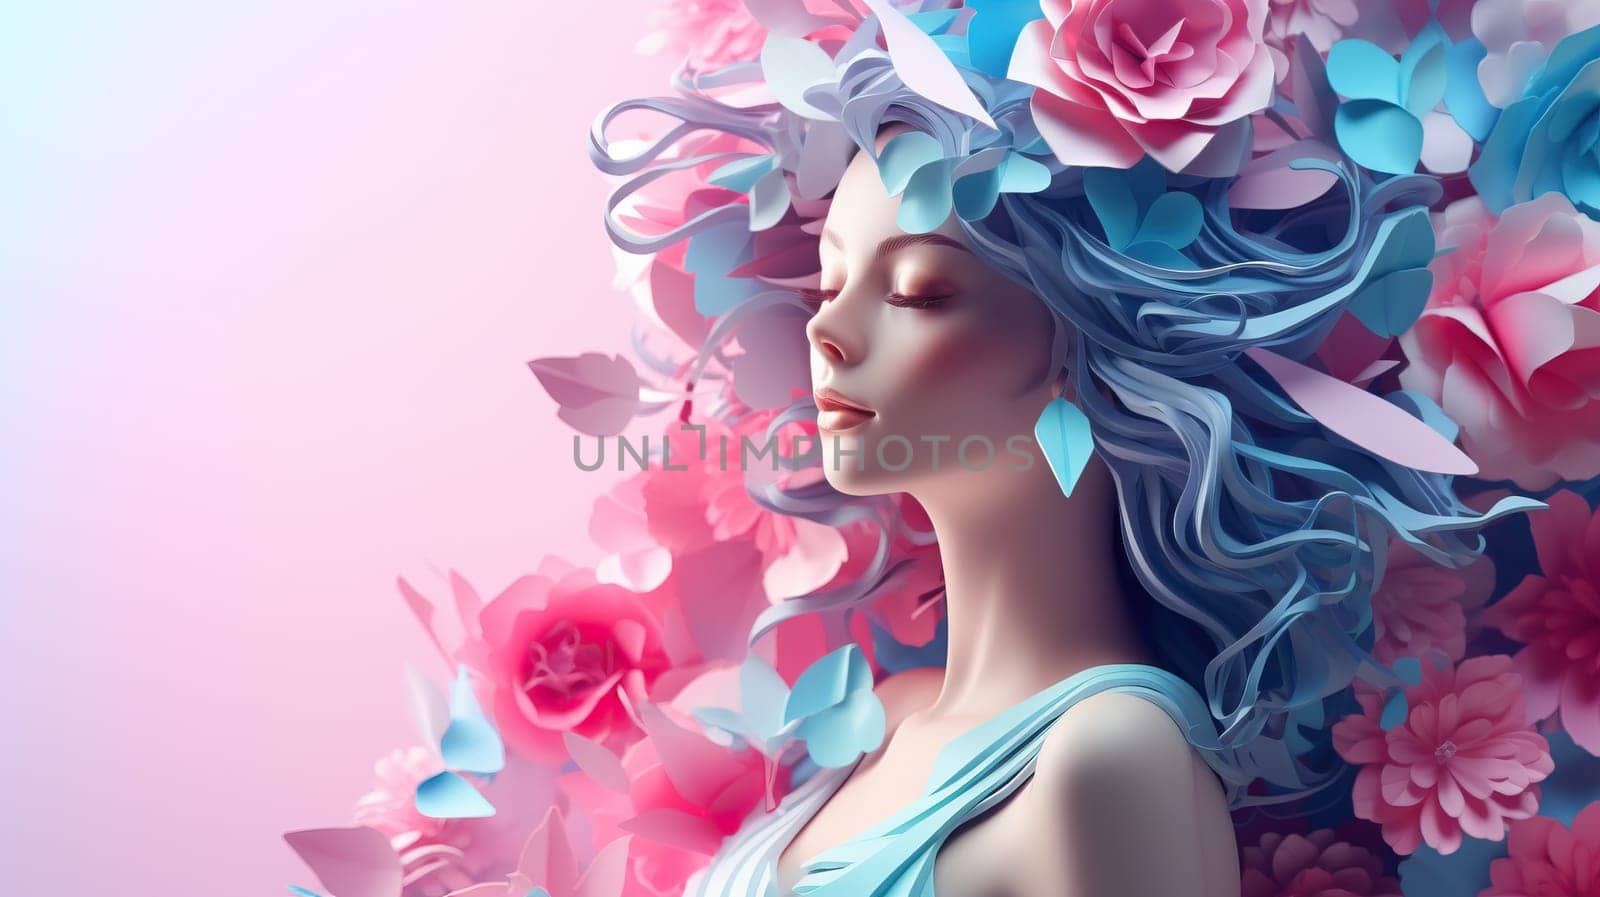 Woman illustration adorned with colorful flowers by ailike